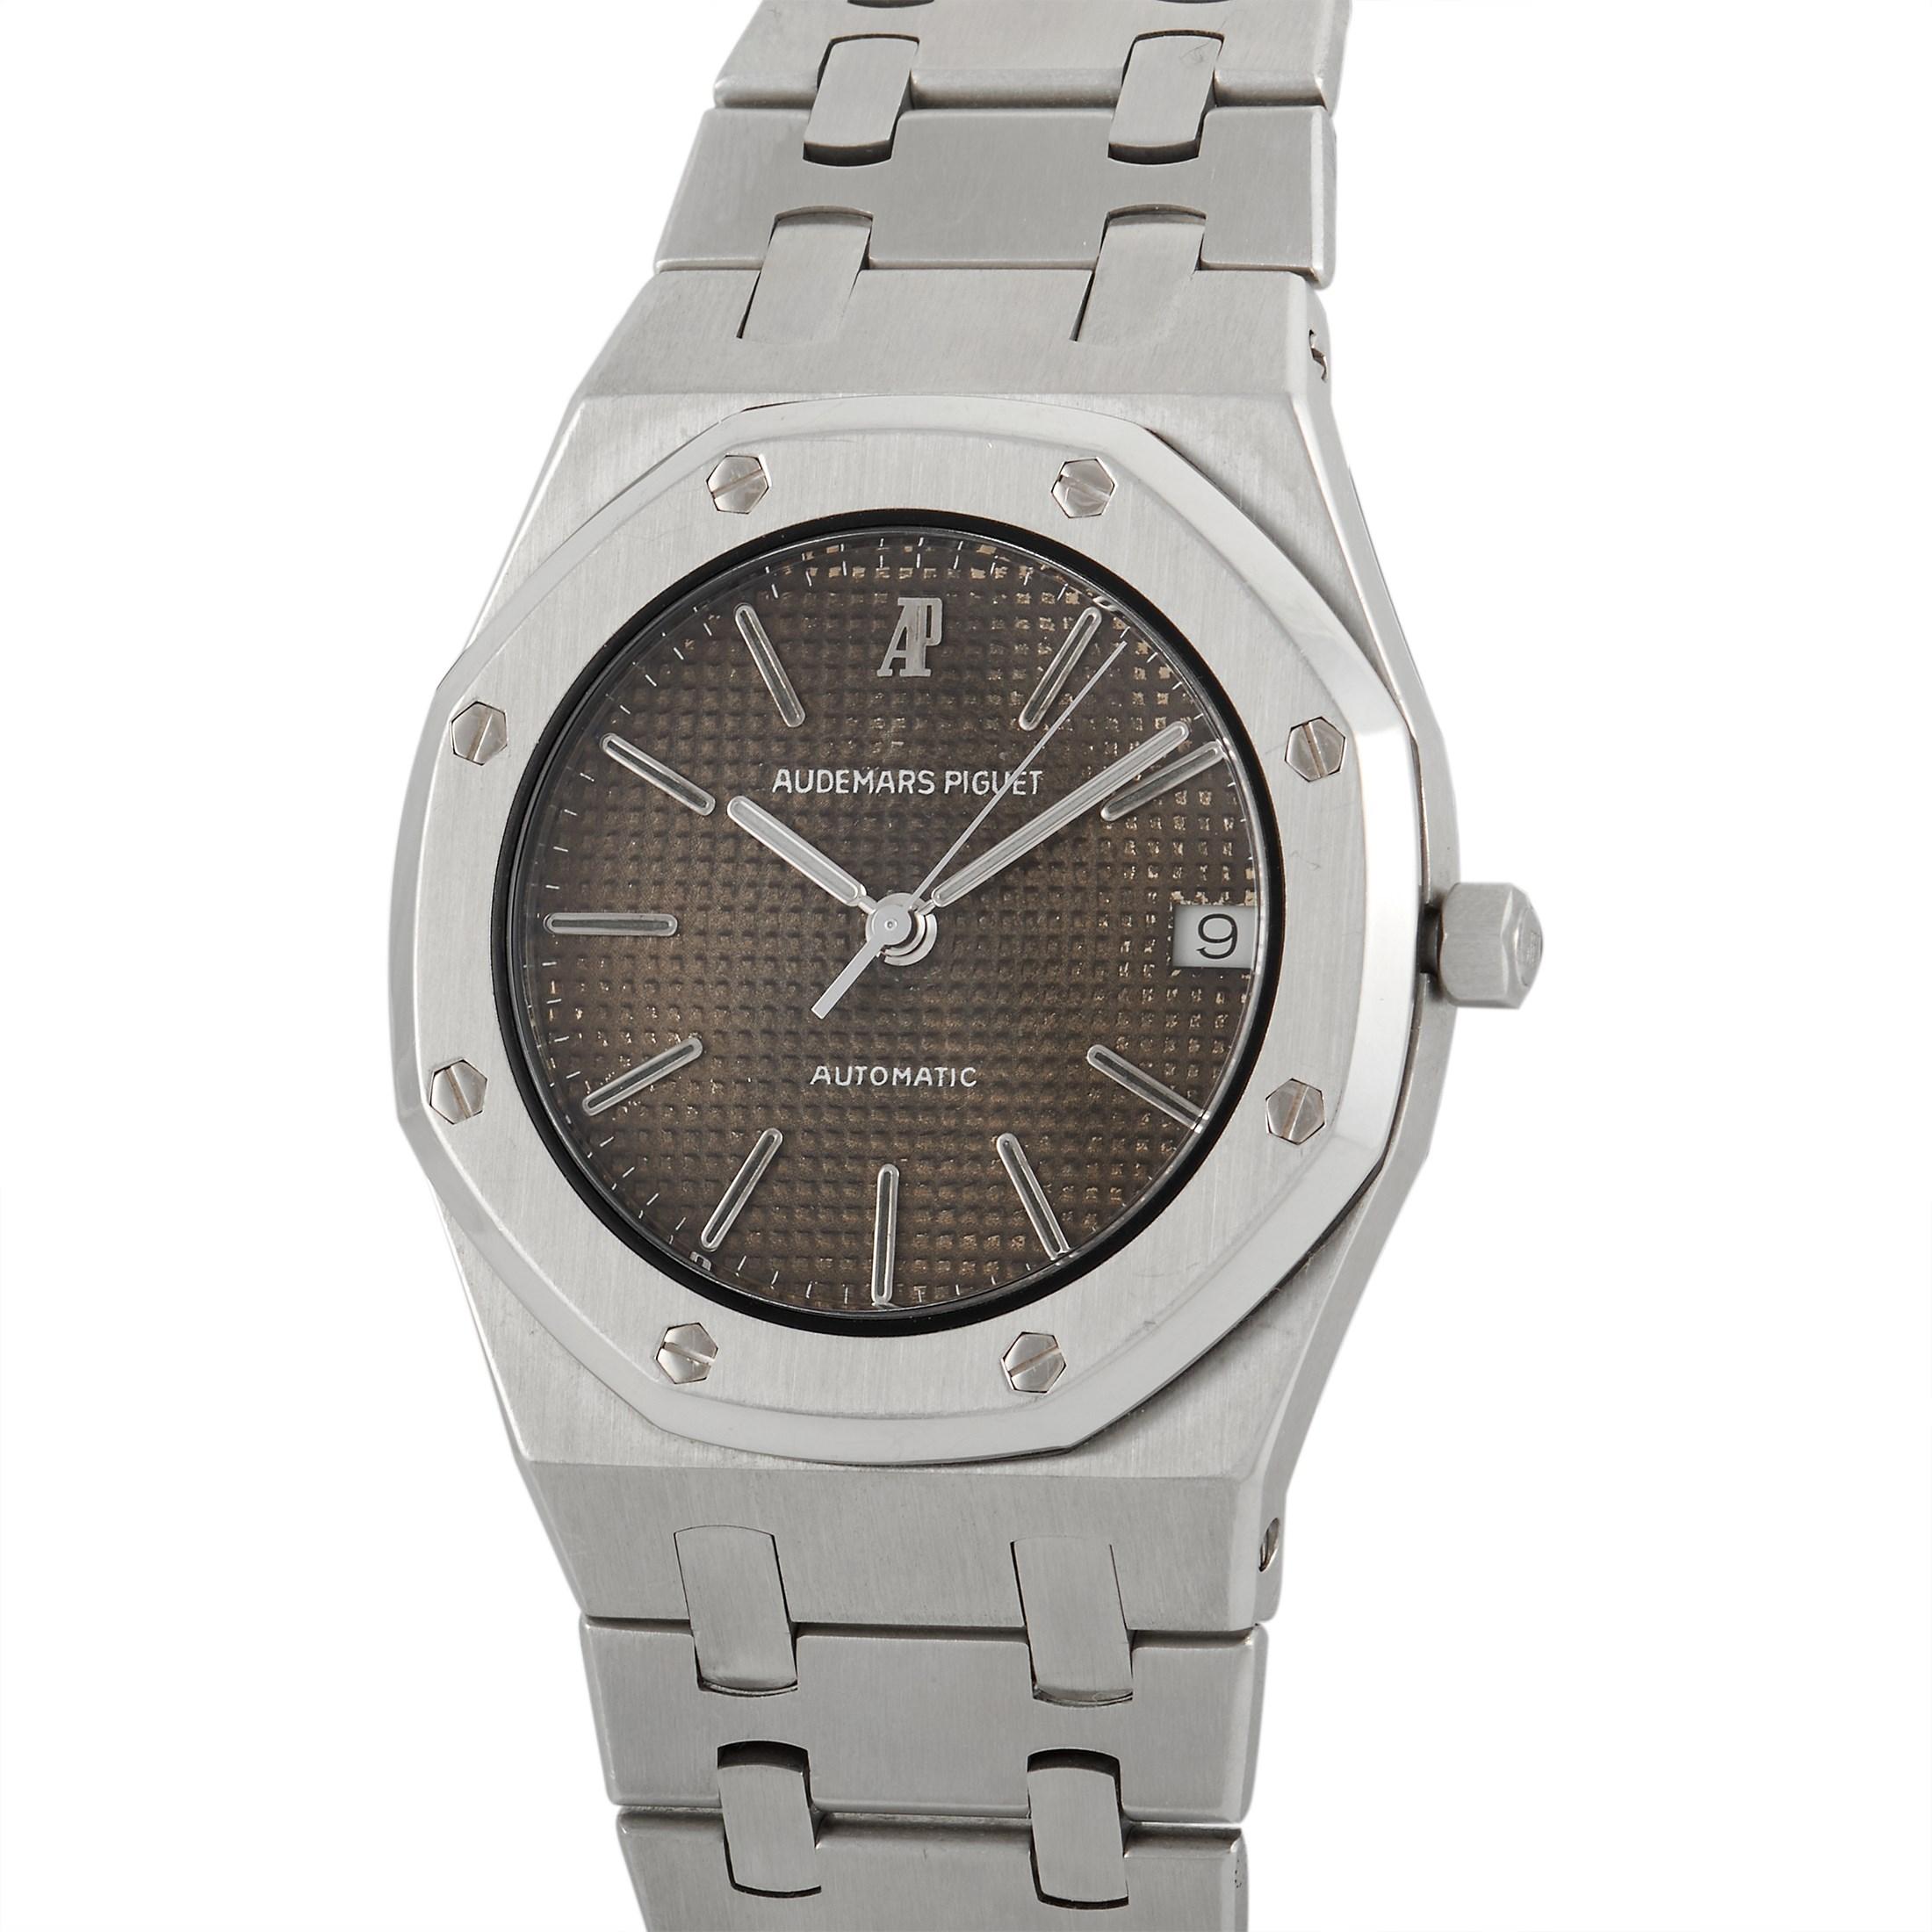 The robust, bold, and elegant Royal Oak from the 80s.

This Audemars Piguet Royal Oak Automatic Watch 4100ST offers a very good wrist presence with its smaller 36mm case, 6mm thickness, and petite tapisserie dial. It has the recognizable octagonal